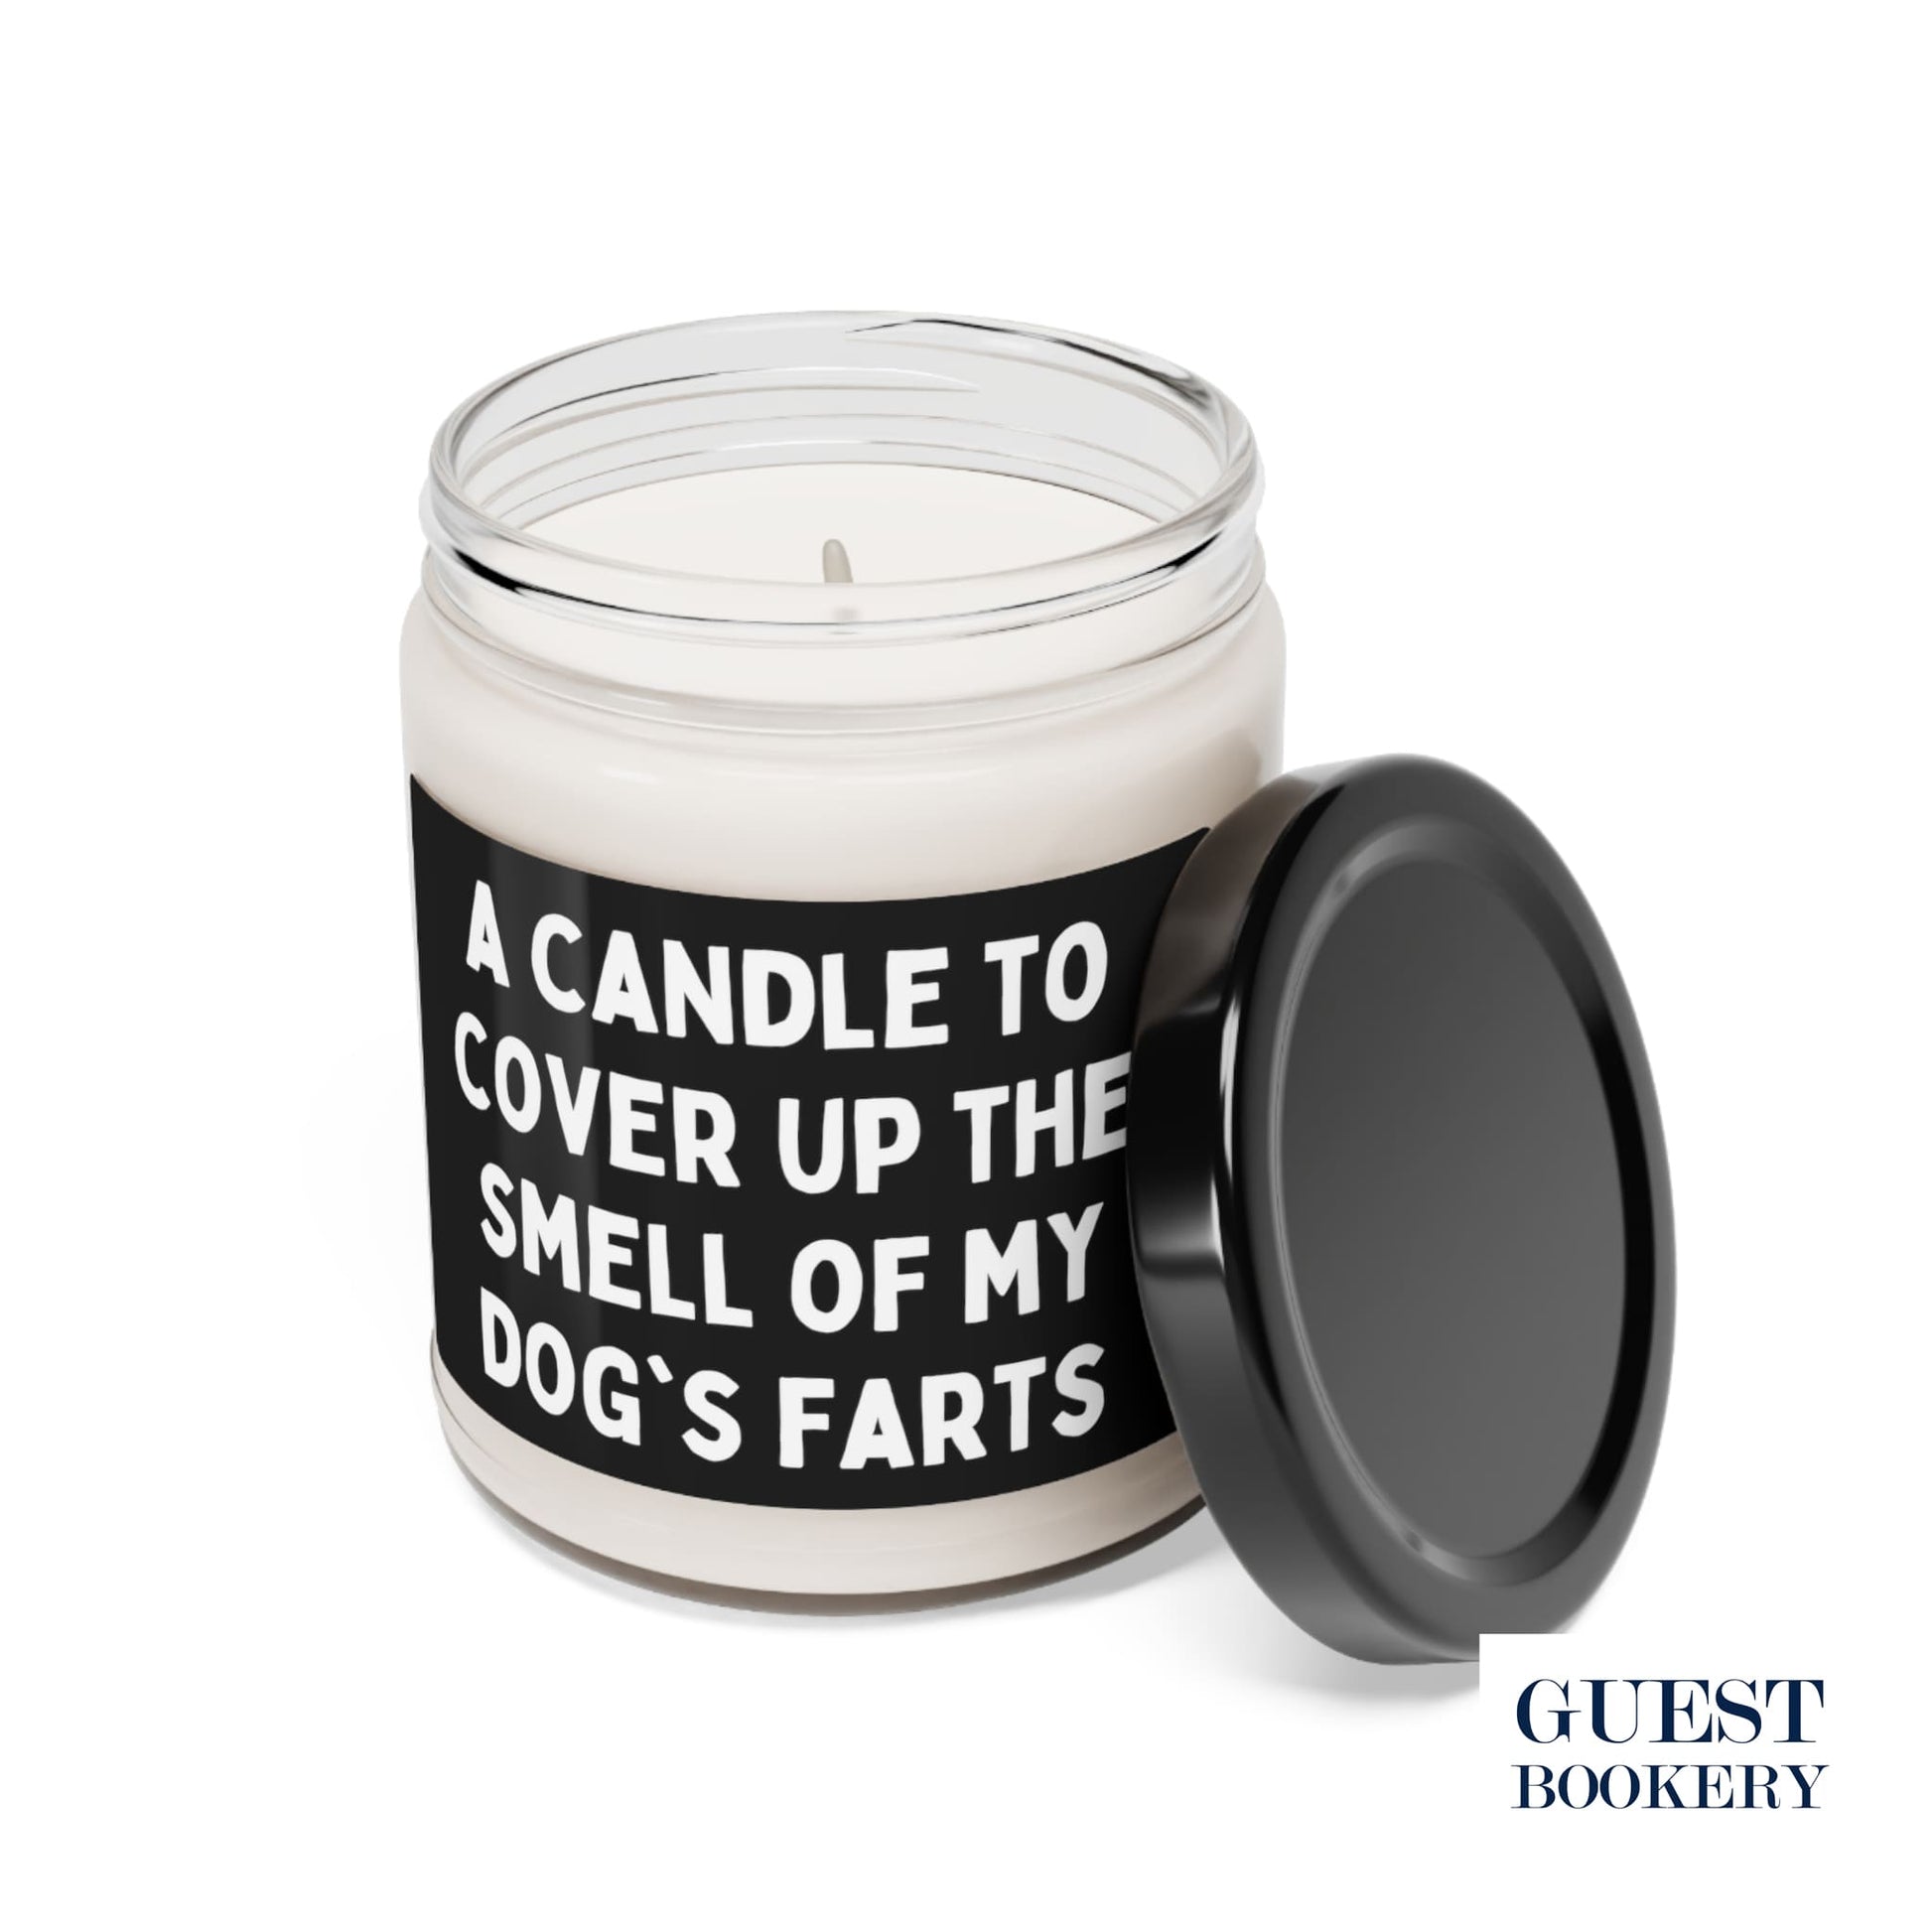 A Candle to Cover Up the Smell of My Dog's Farts Candle